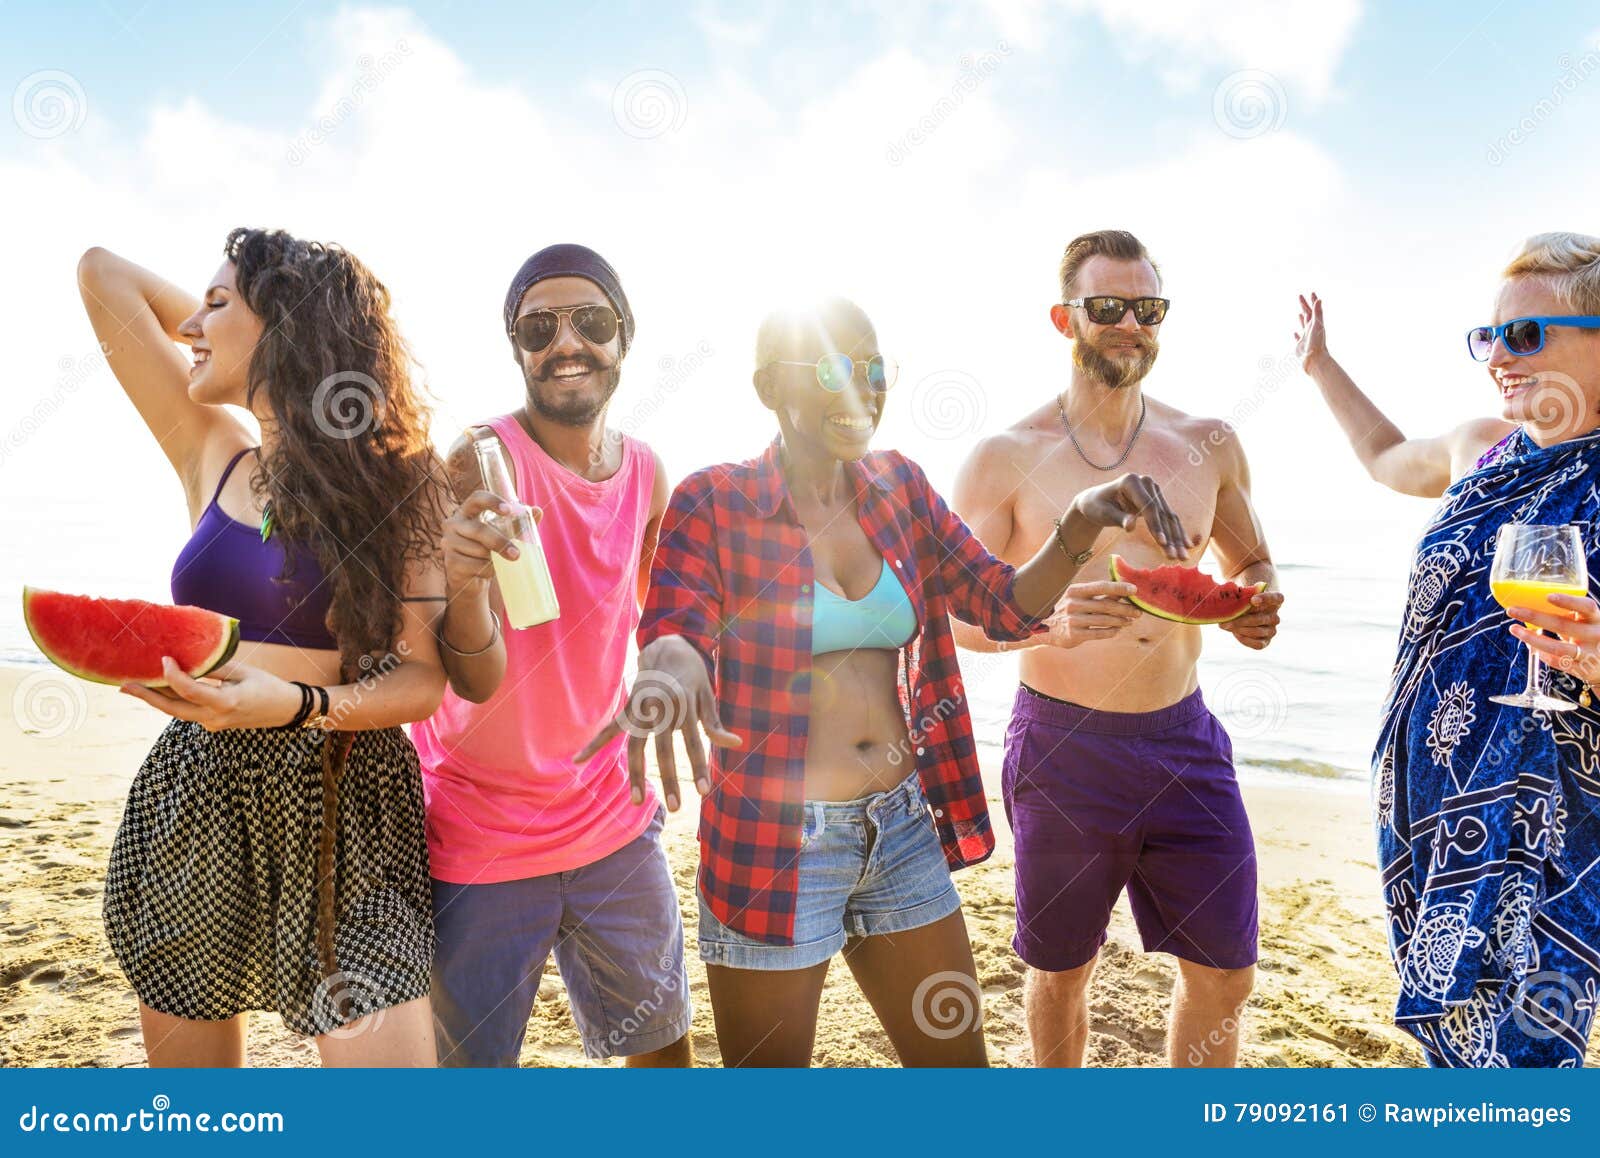 Diverse Young People Fun Beach Concept Stock Image - Image of ...